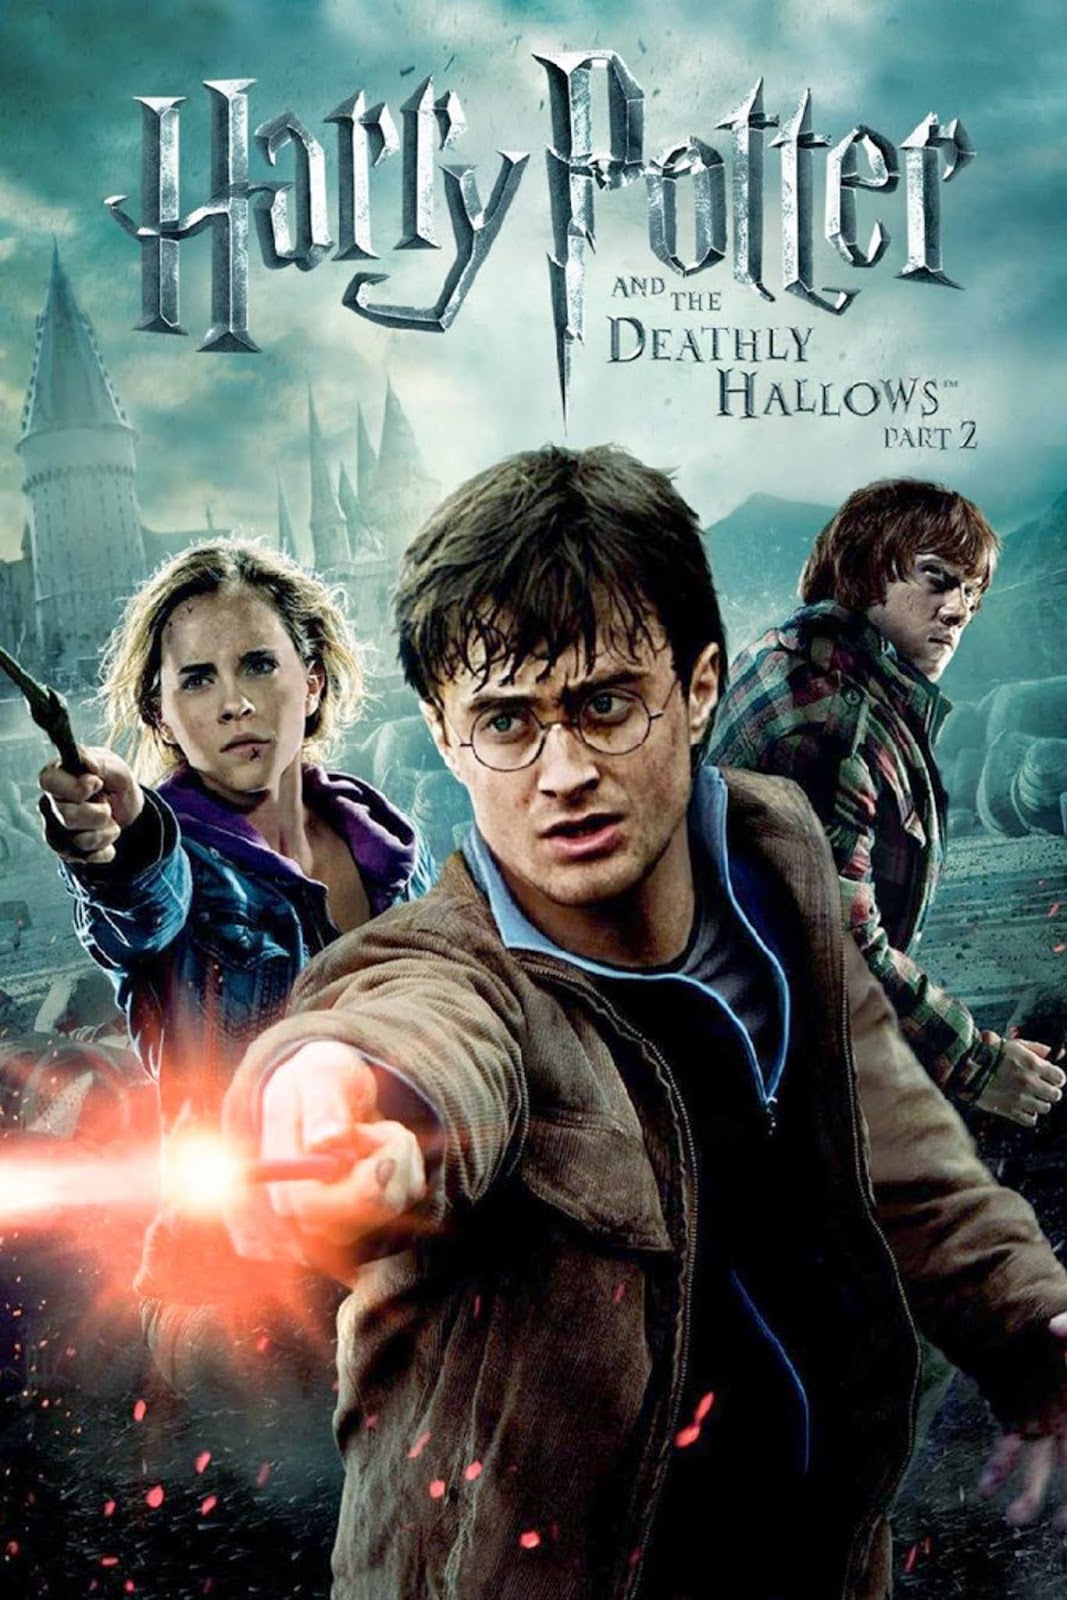 harry potter part 3 Download HD in hindi